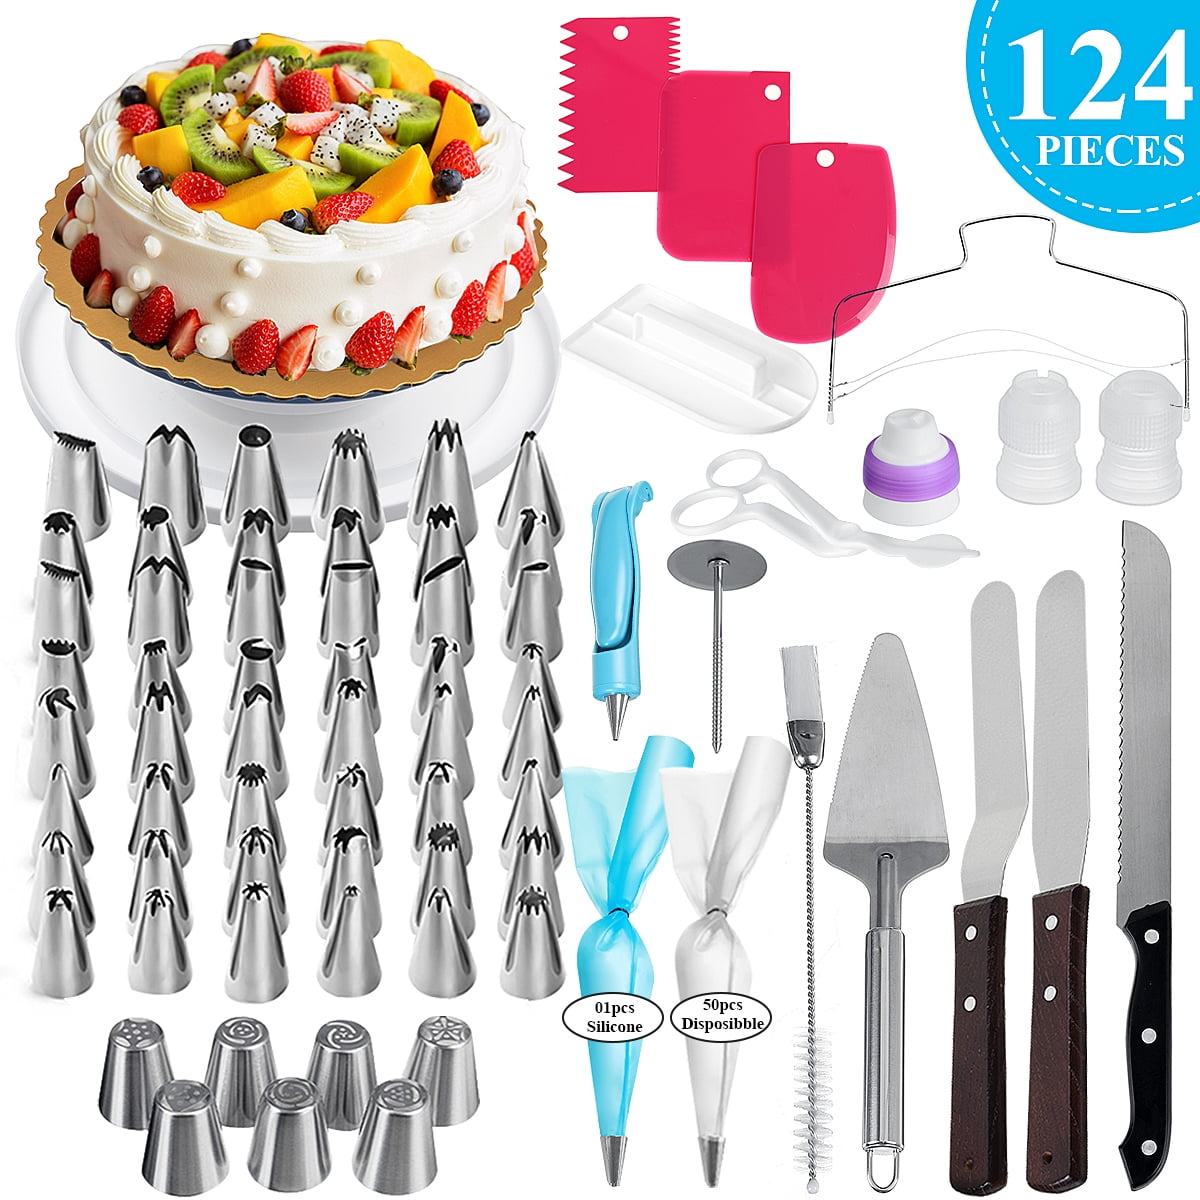 42pcs Cake Decorating Tools Kit Turntable Icing Tips Nozzles Pastry Supplies Set